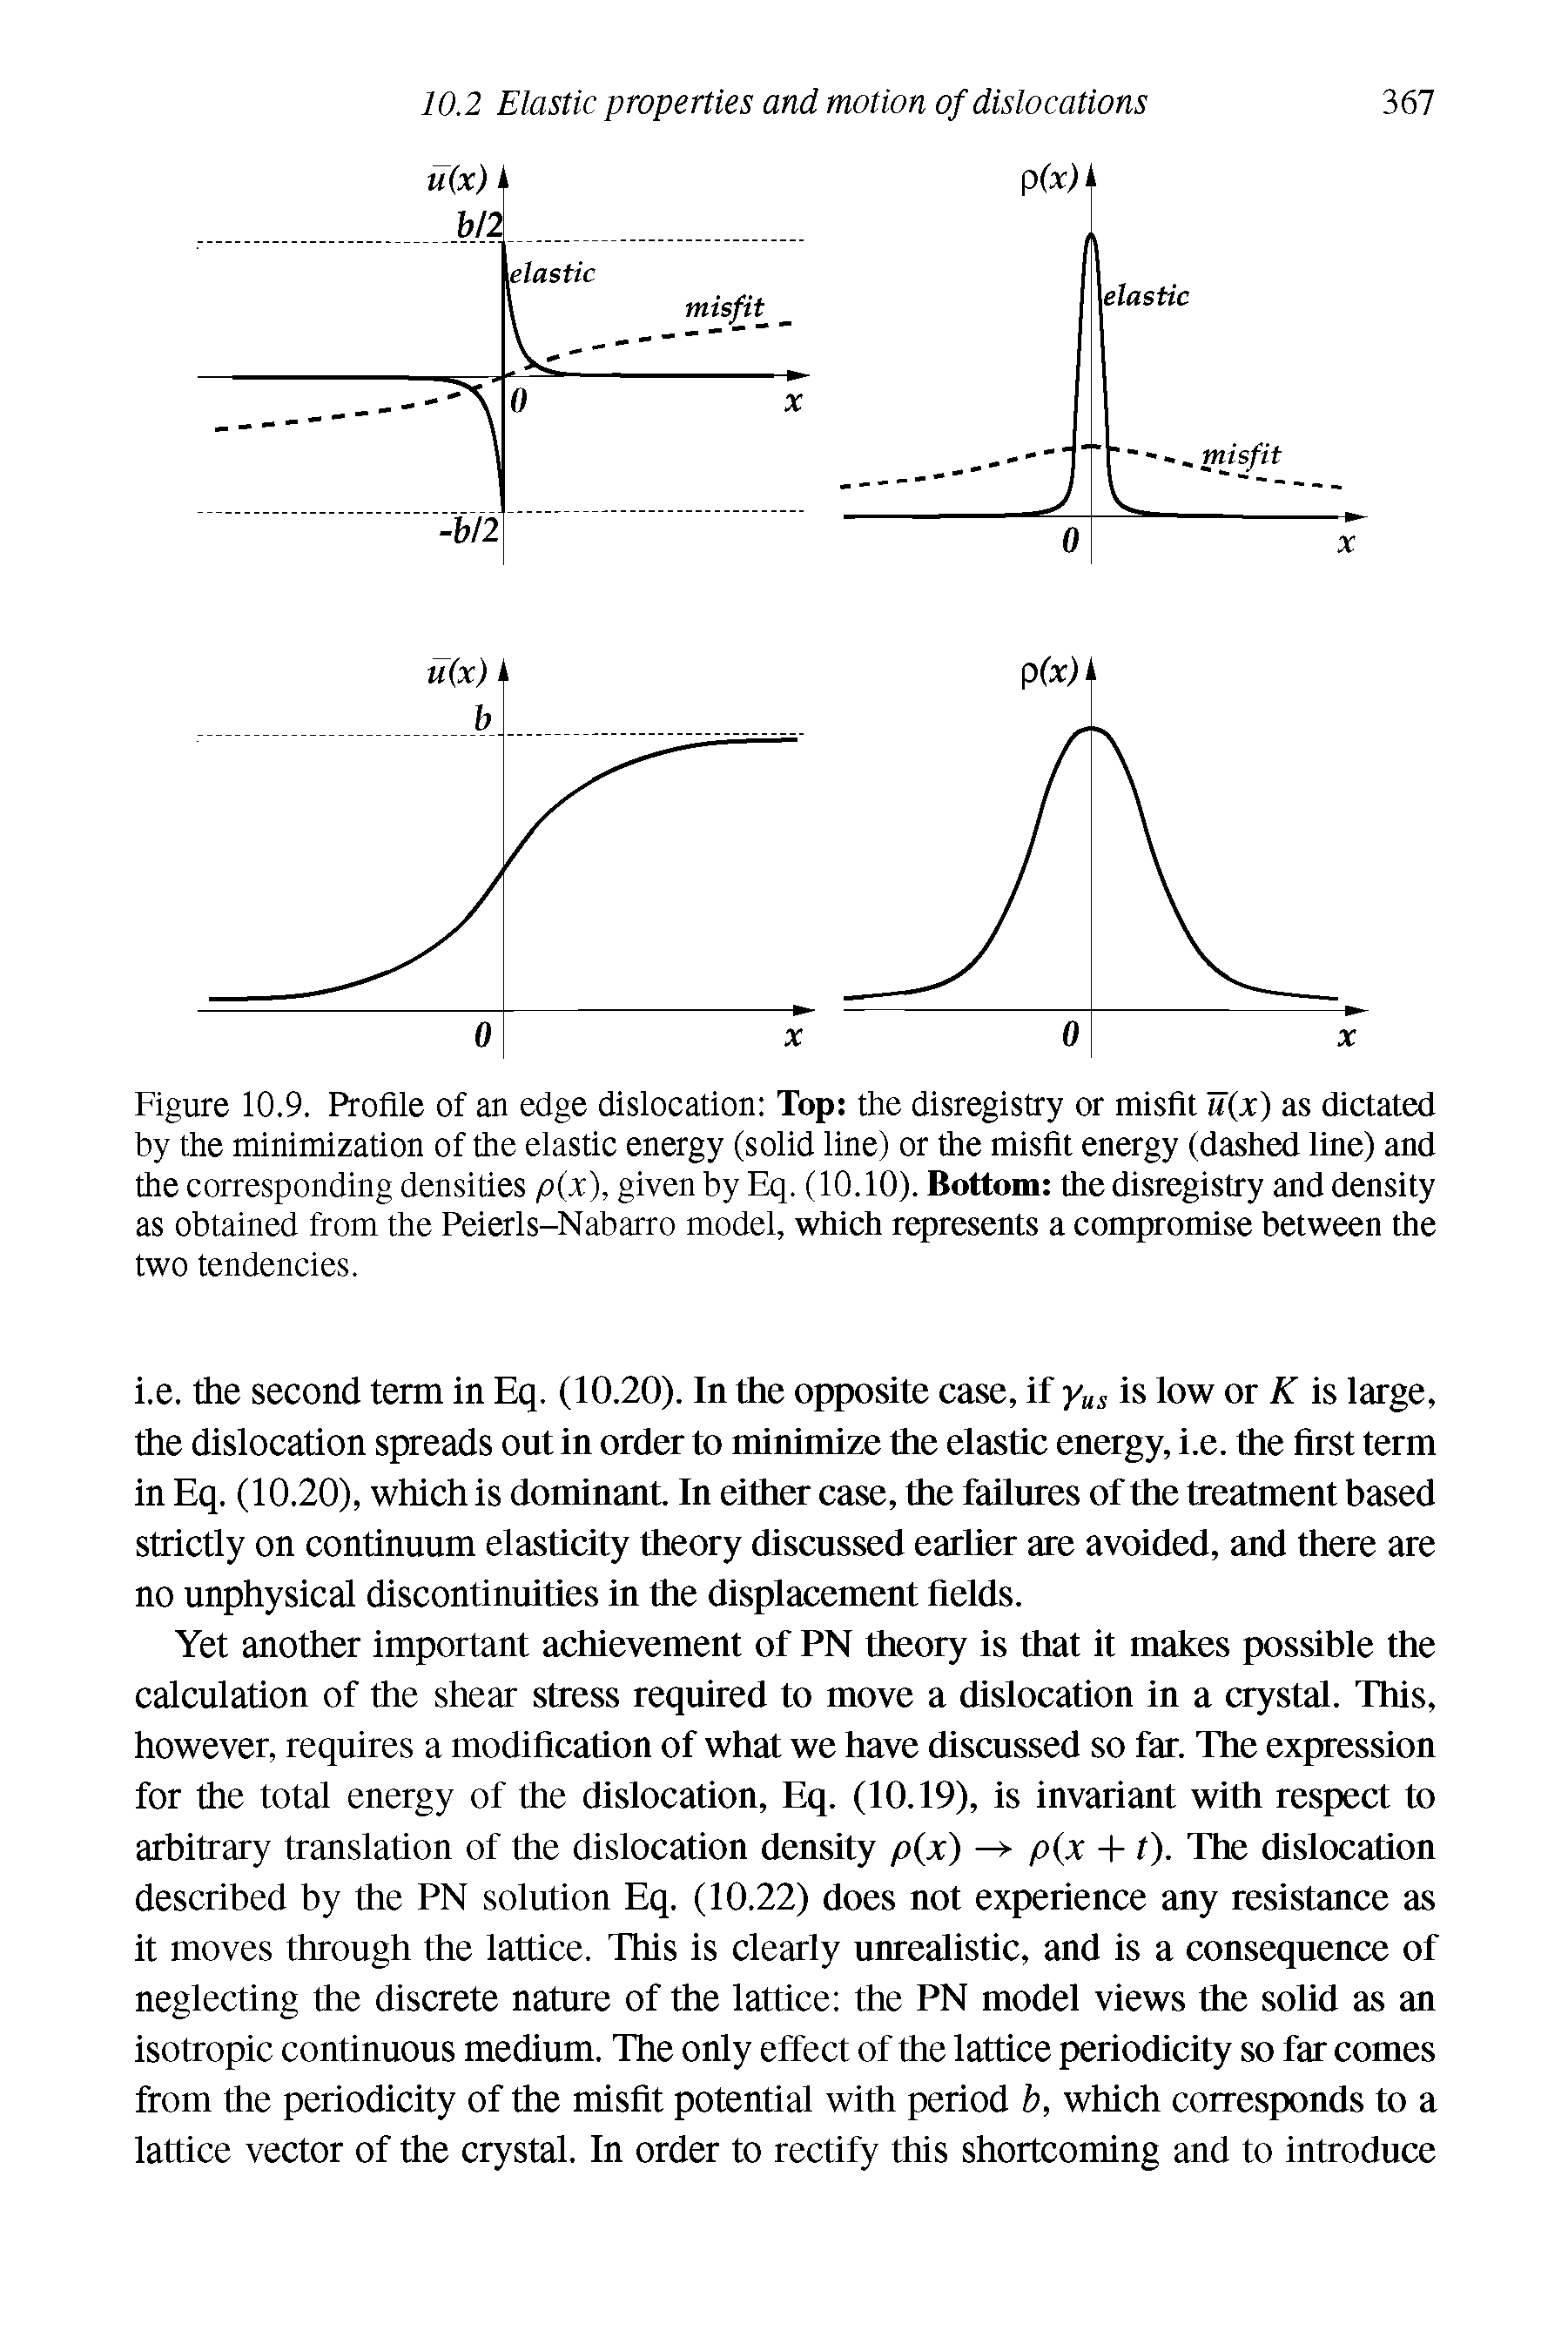 Figure 10.9. Profile of an edge dislocation Top the disregistry or misfit u(x) as dictated by the minimization of the elastic energy (solid line) or the misfit energy (dashed line) and the corresponding densities p(x), given by Eq. (10.10). Bottom the disregistry and density as obtained from the Peierls-Nabarro model, which represents a compromise between the...